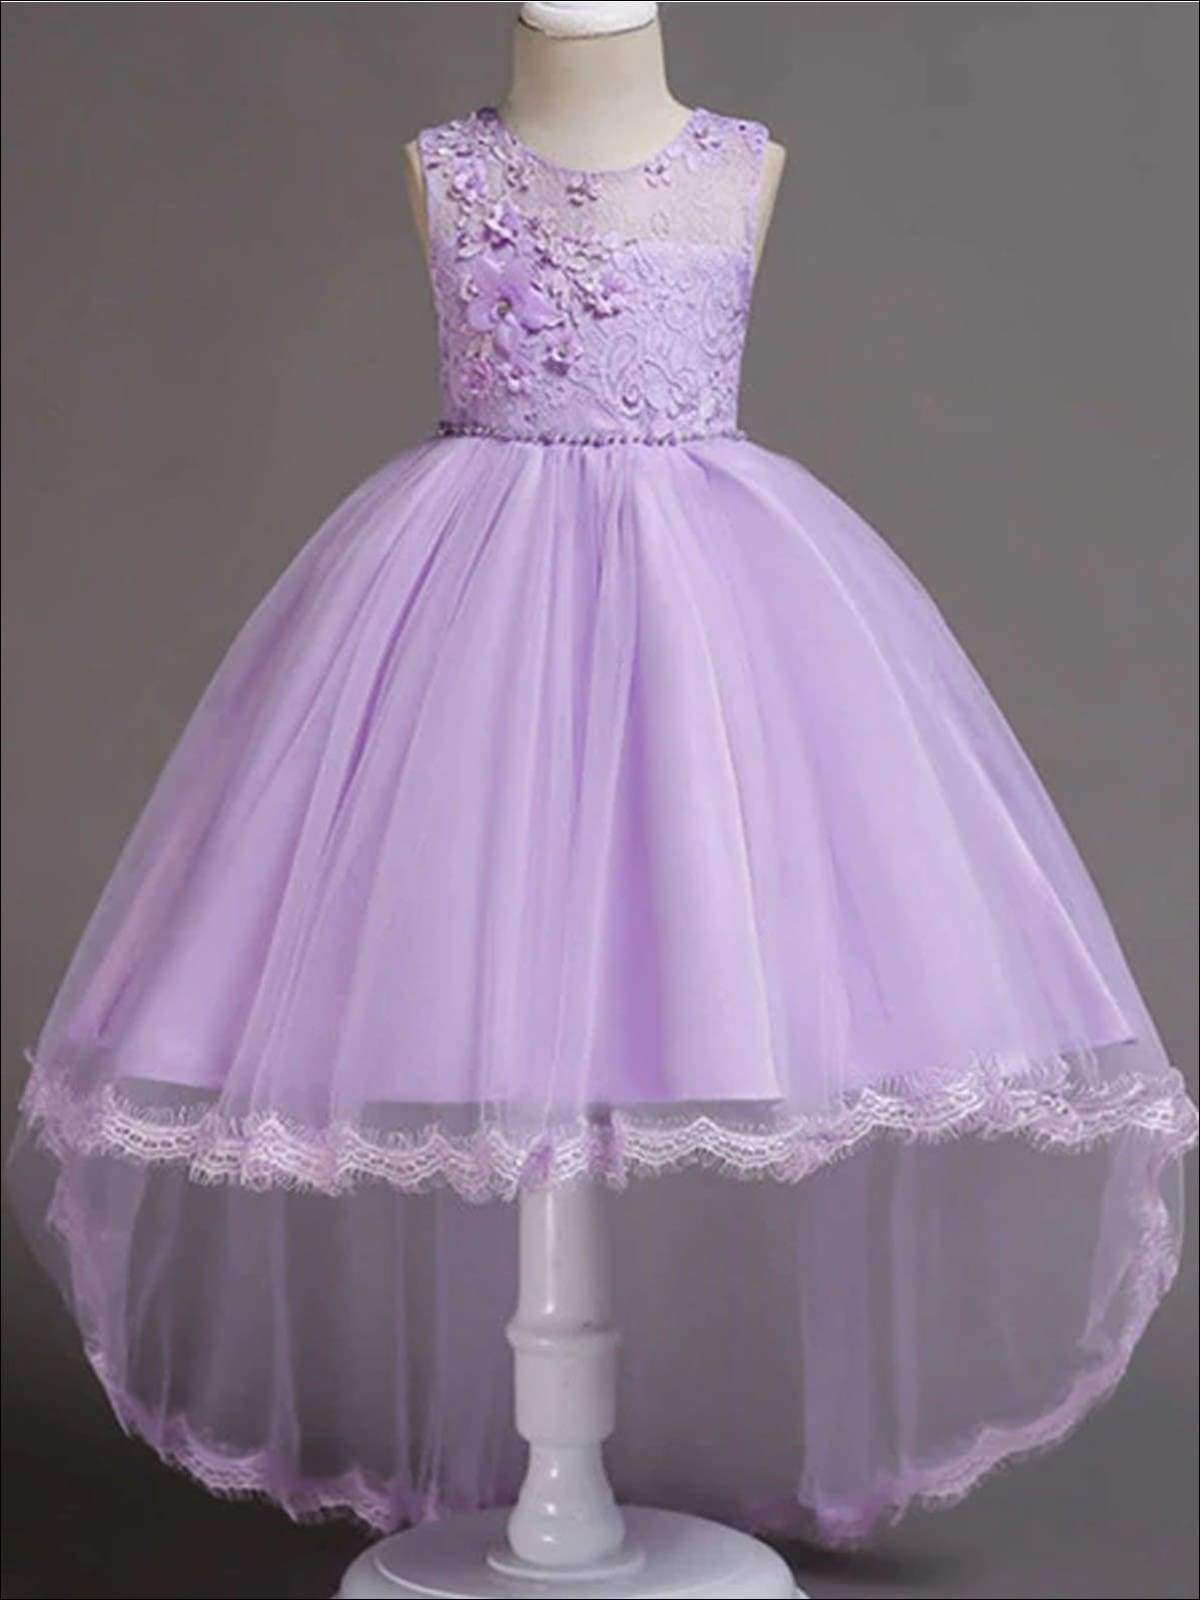 Girls Special Occasion Dress | Sheer Embroidered Hi-Lo Party Dress ...